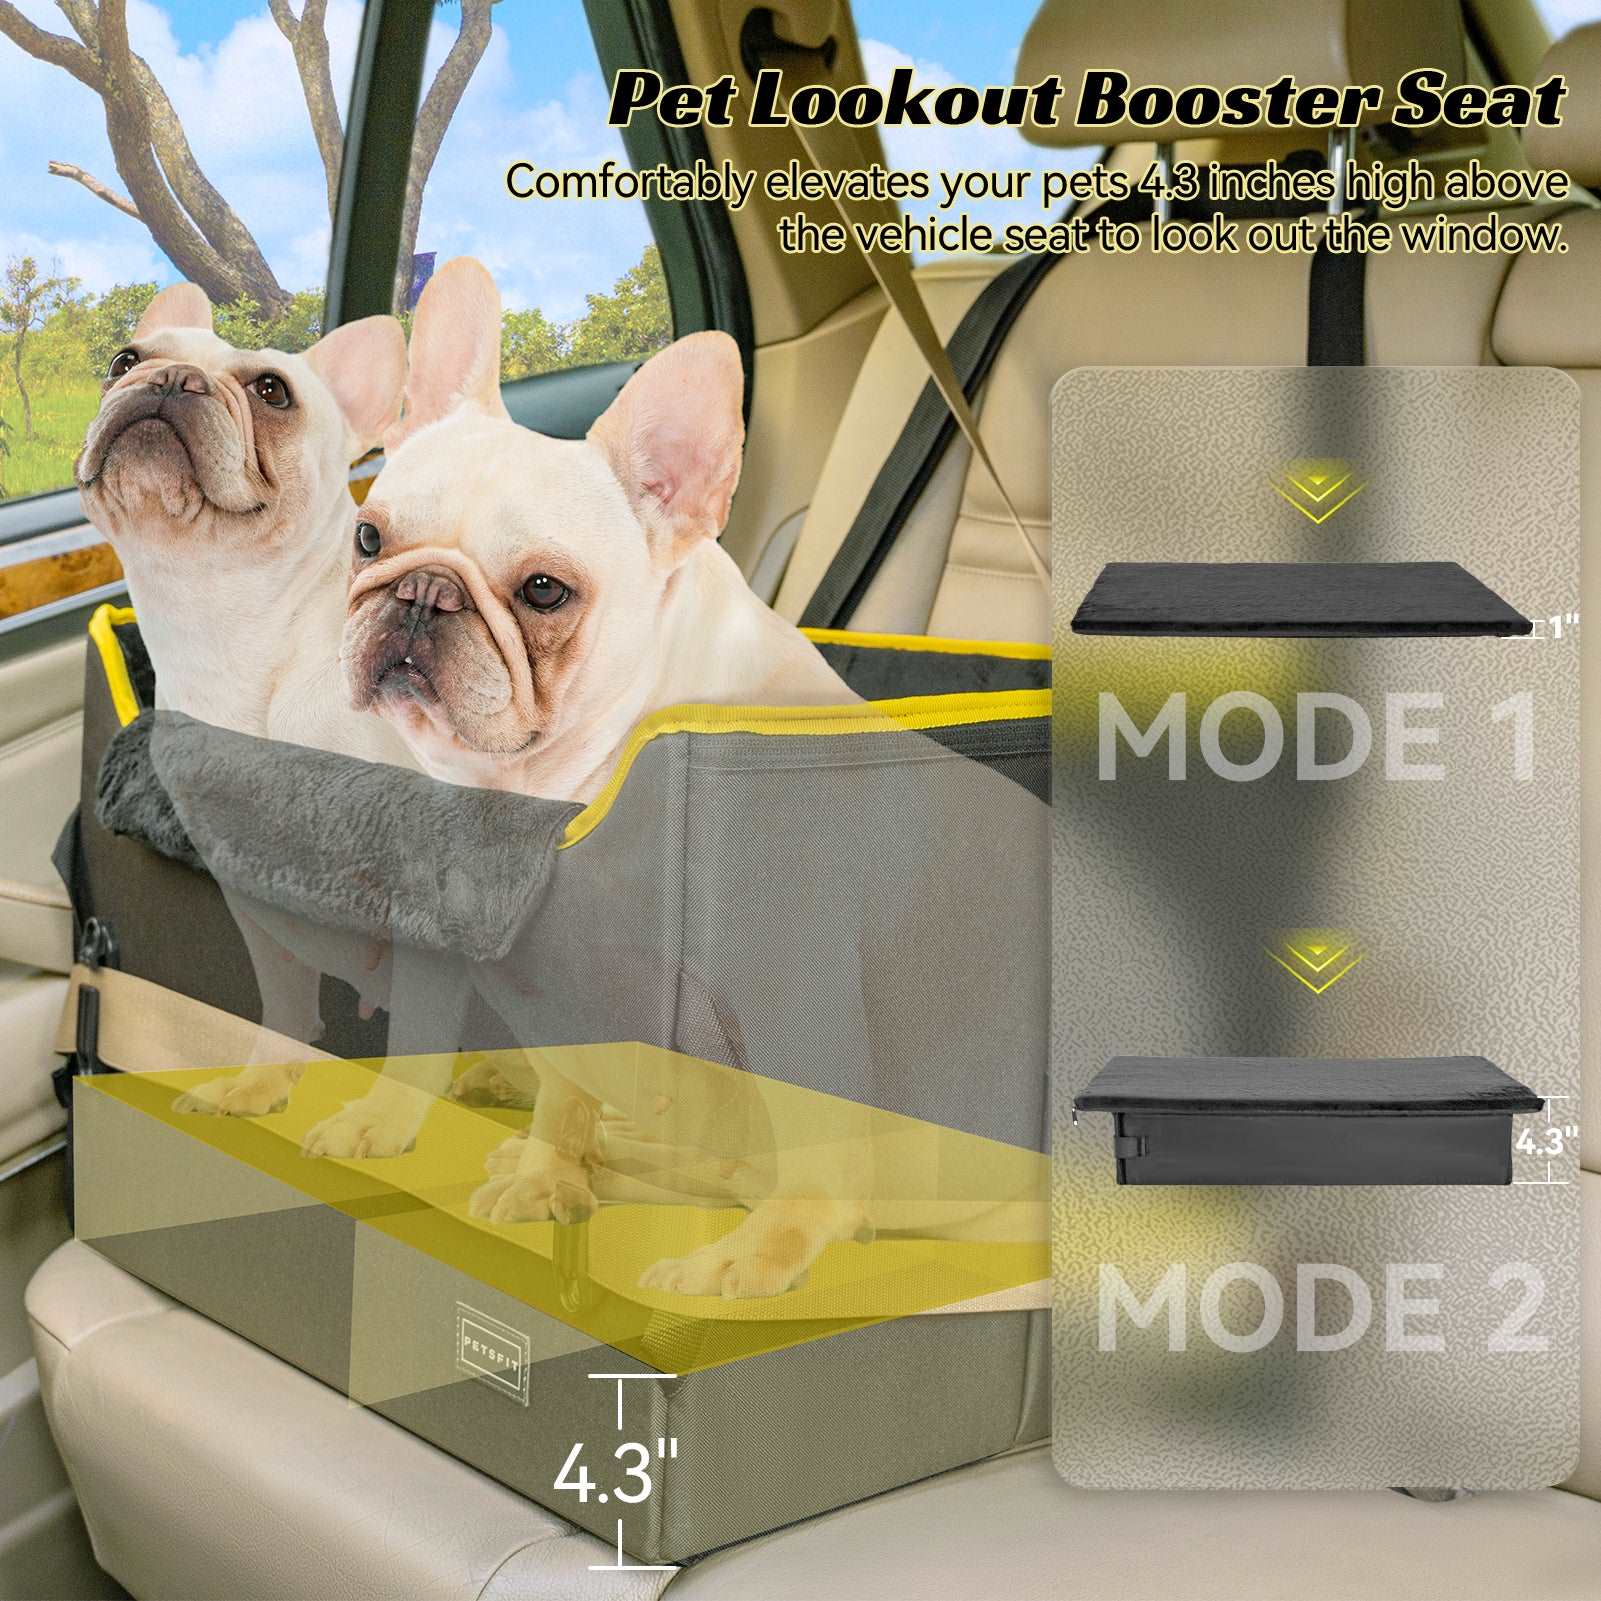 petsfit-dog-booster-car-seat-dog-car-seat-for-medium-dogs-with-2-clip-on-safety-leashes-06